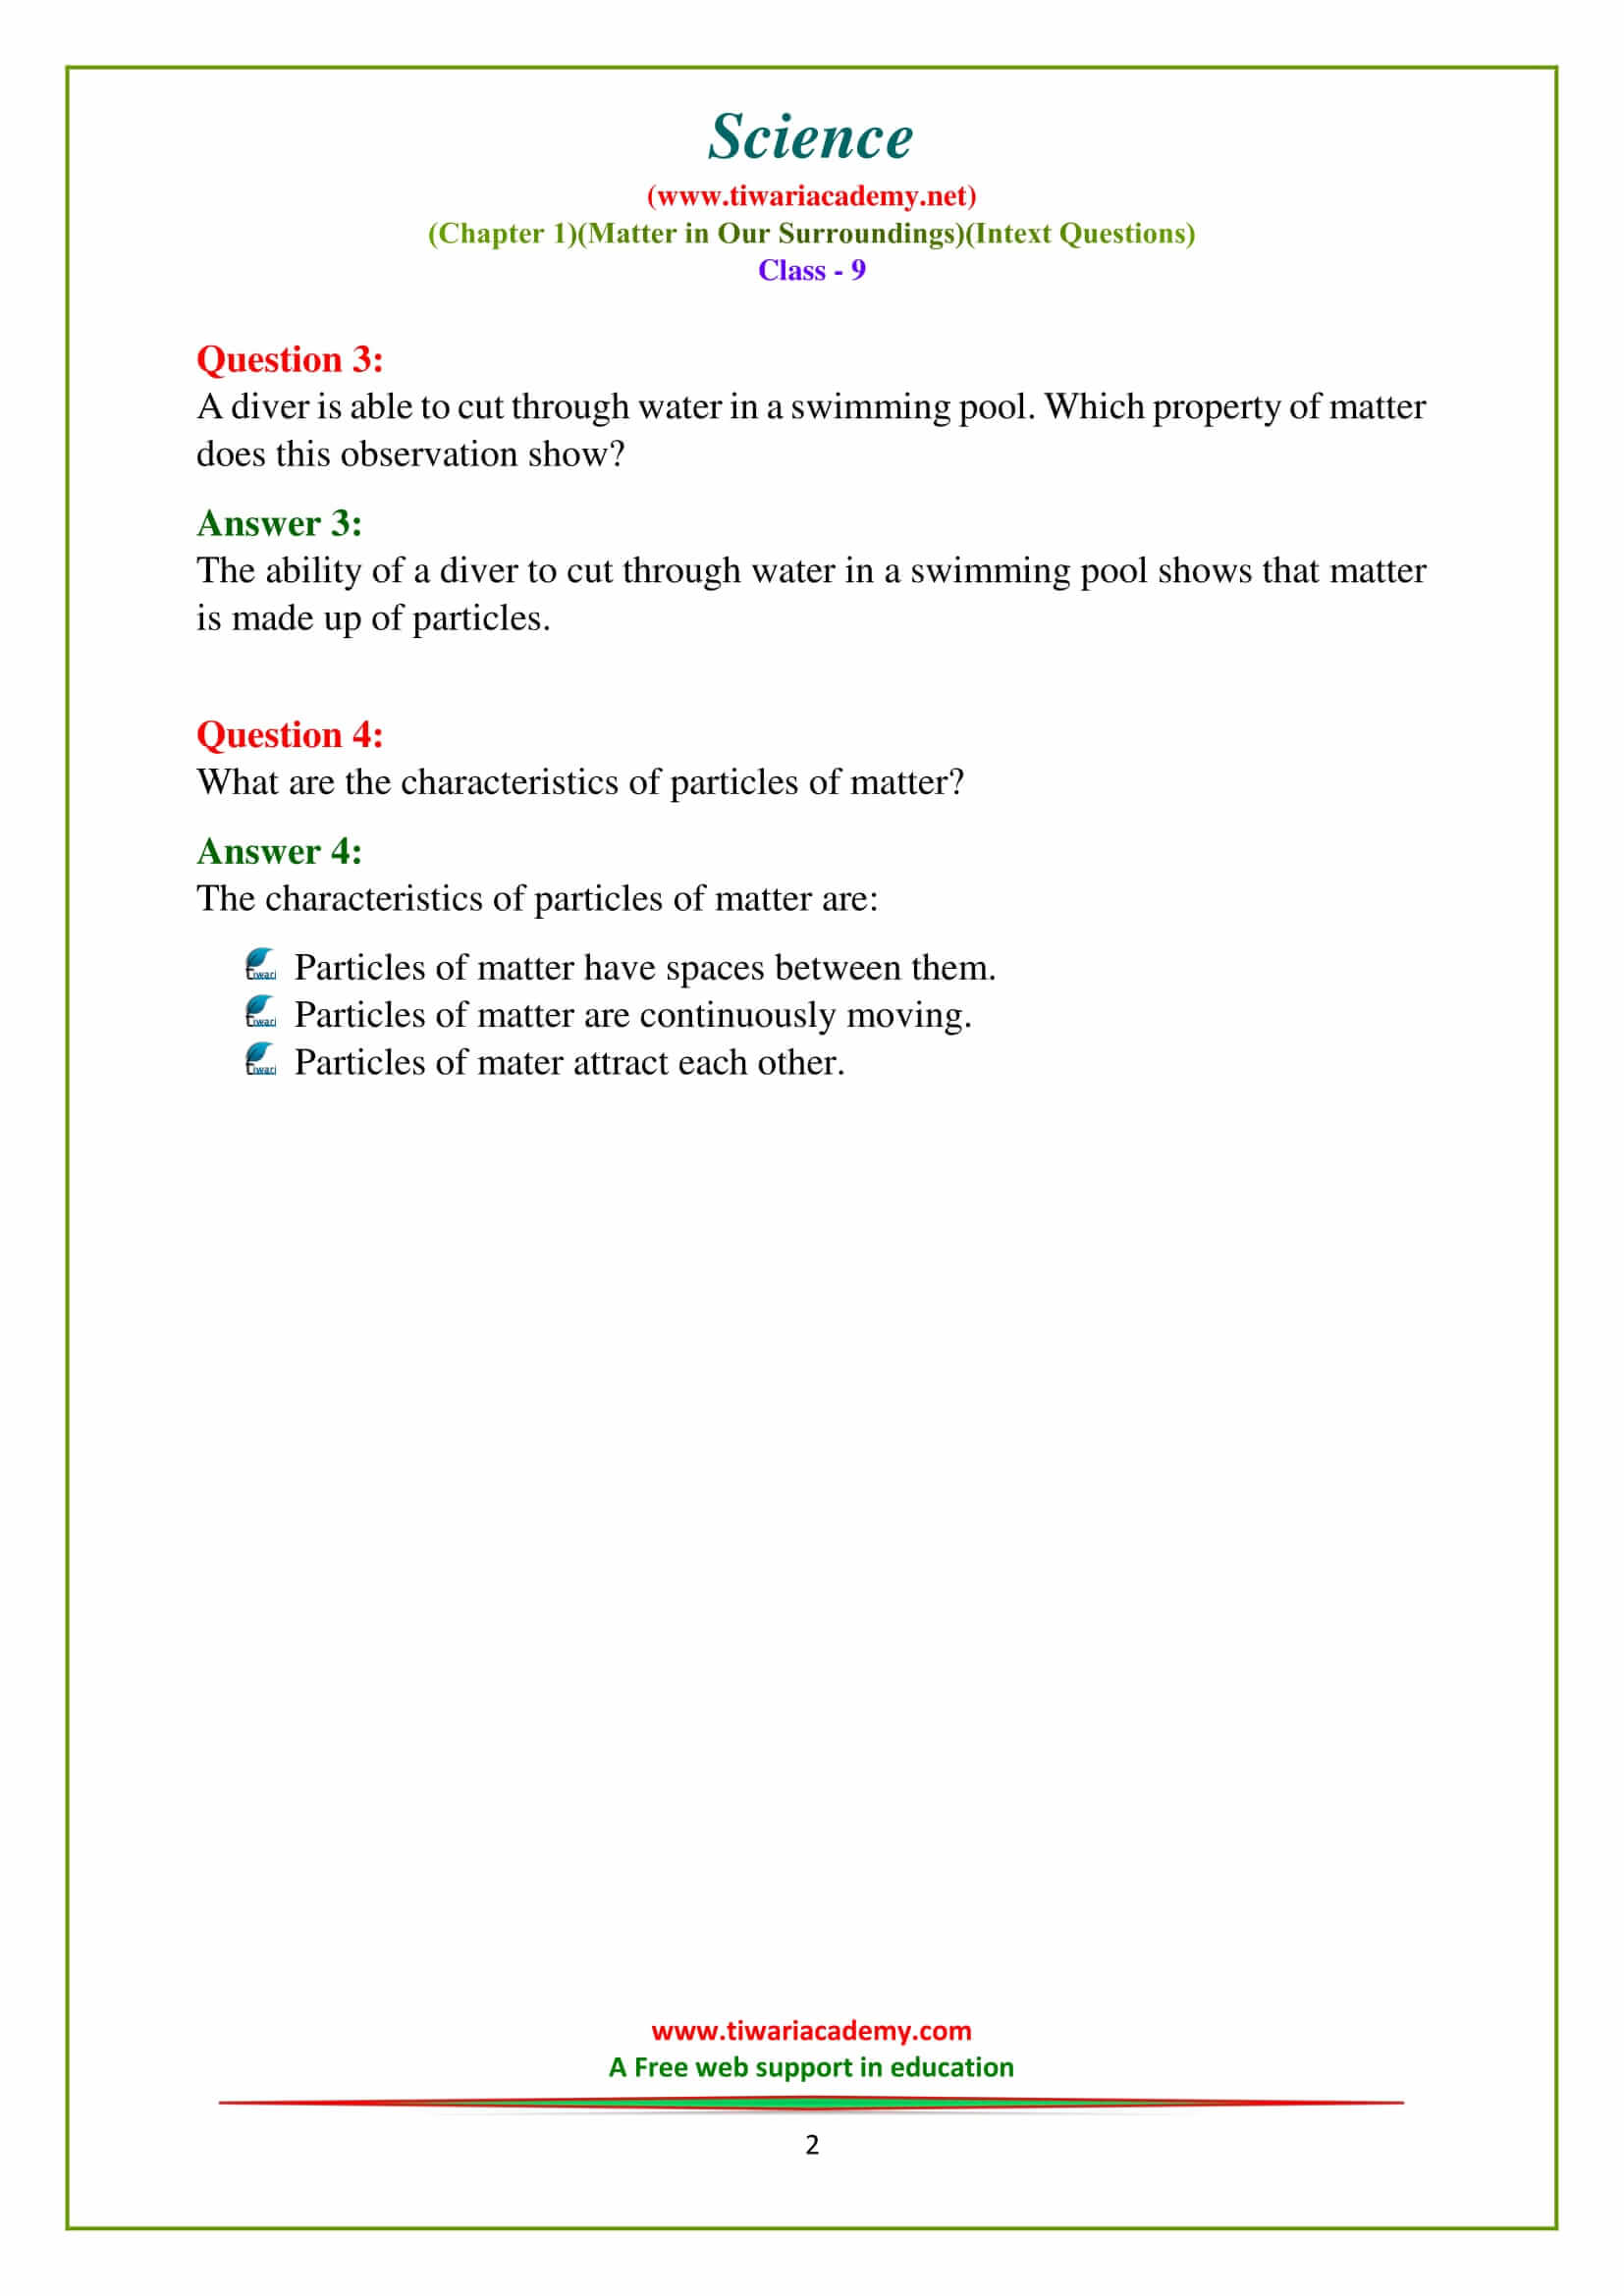 NCERT Solutions for Class 9 Science Chapter 1 Matter in Our Surroundings page 3 all answers